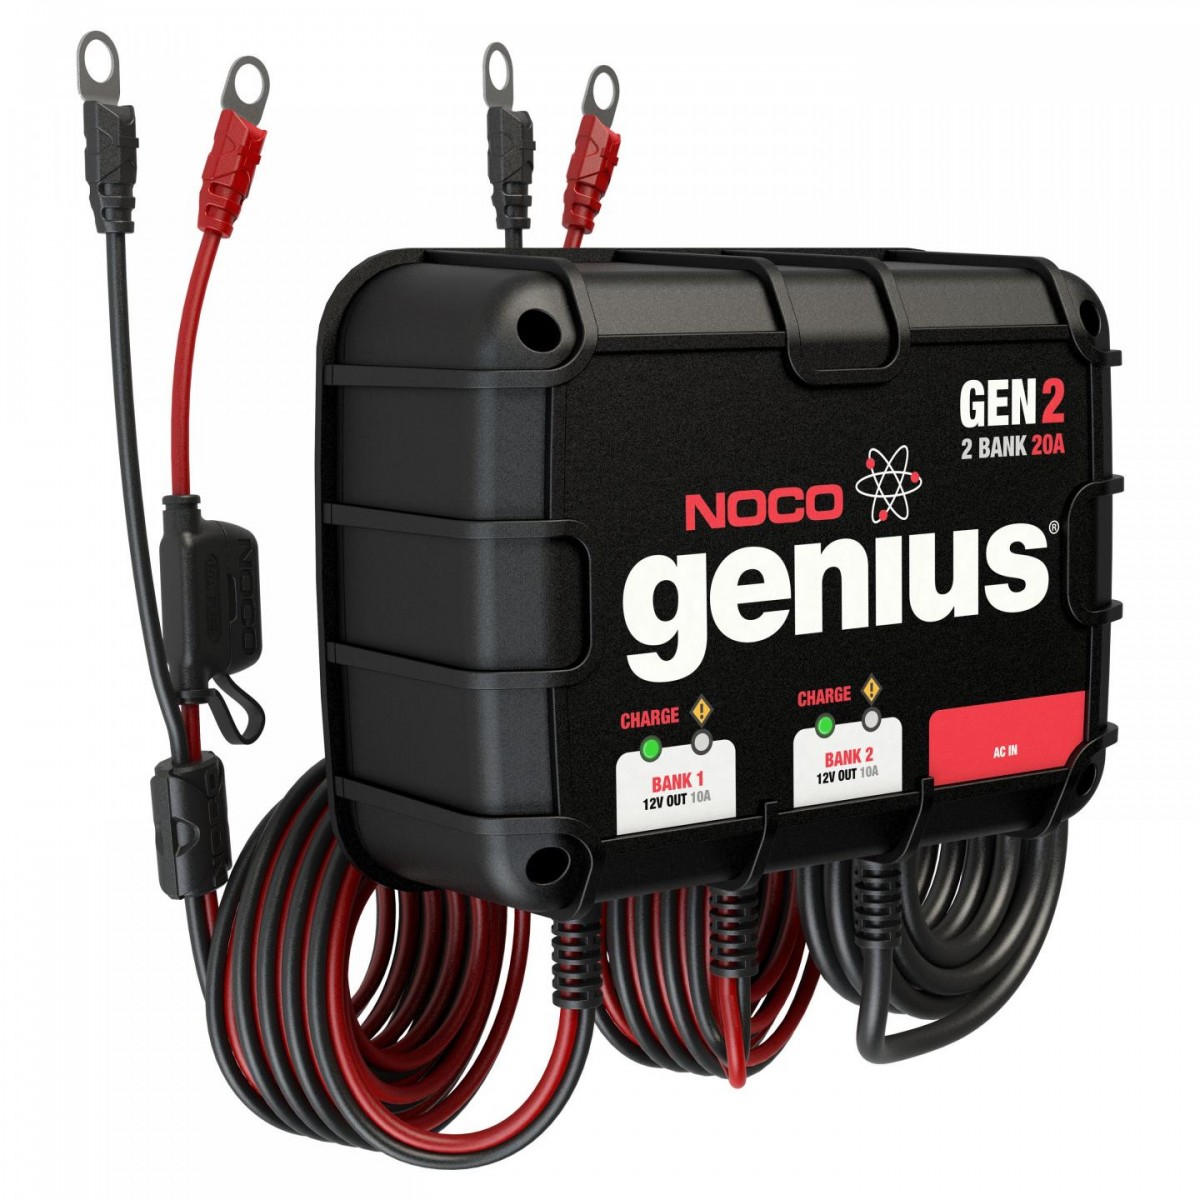 NOCO 2Bank 20A OnBoard Battery Charger GEN2